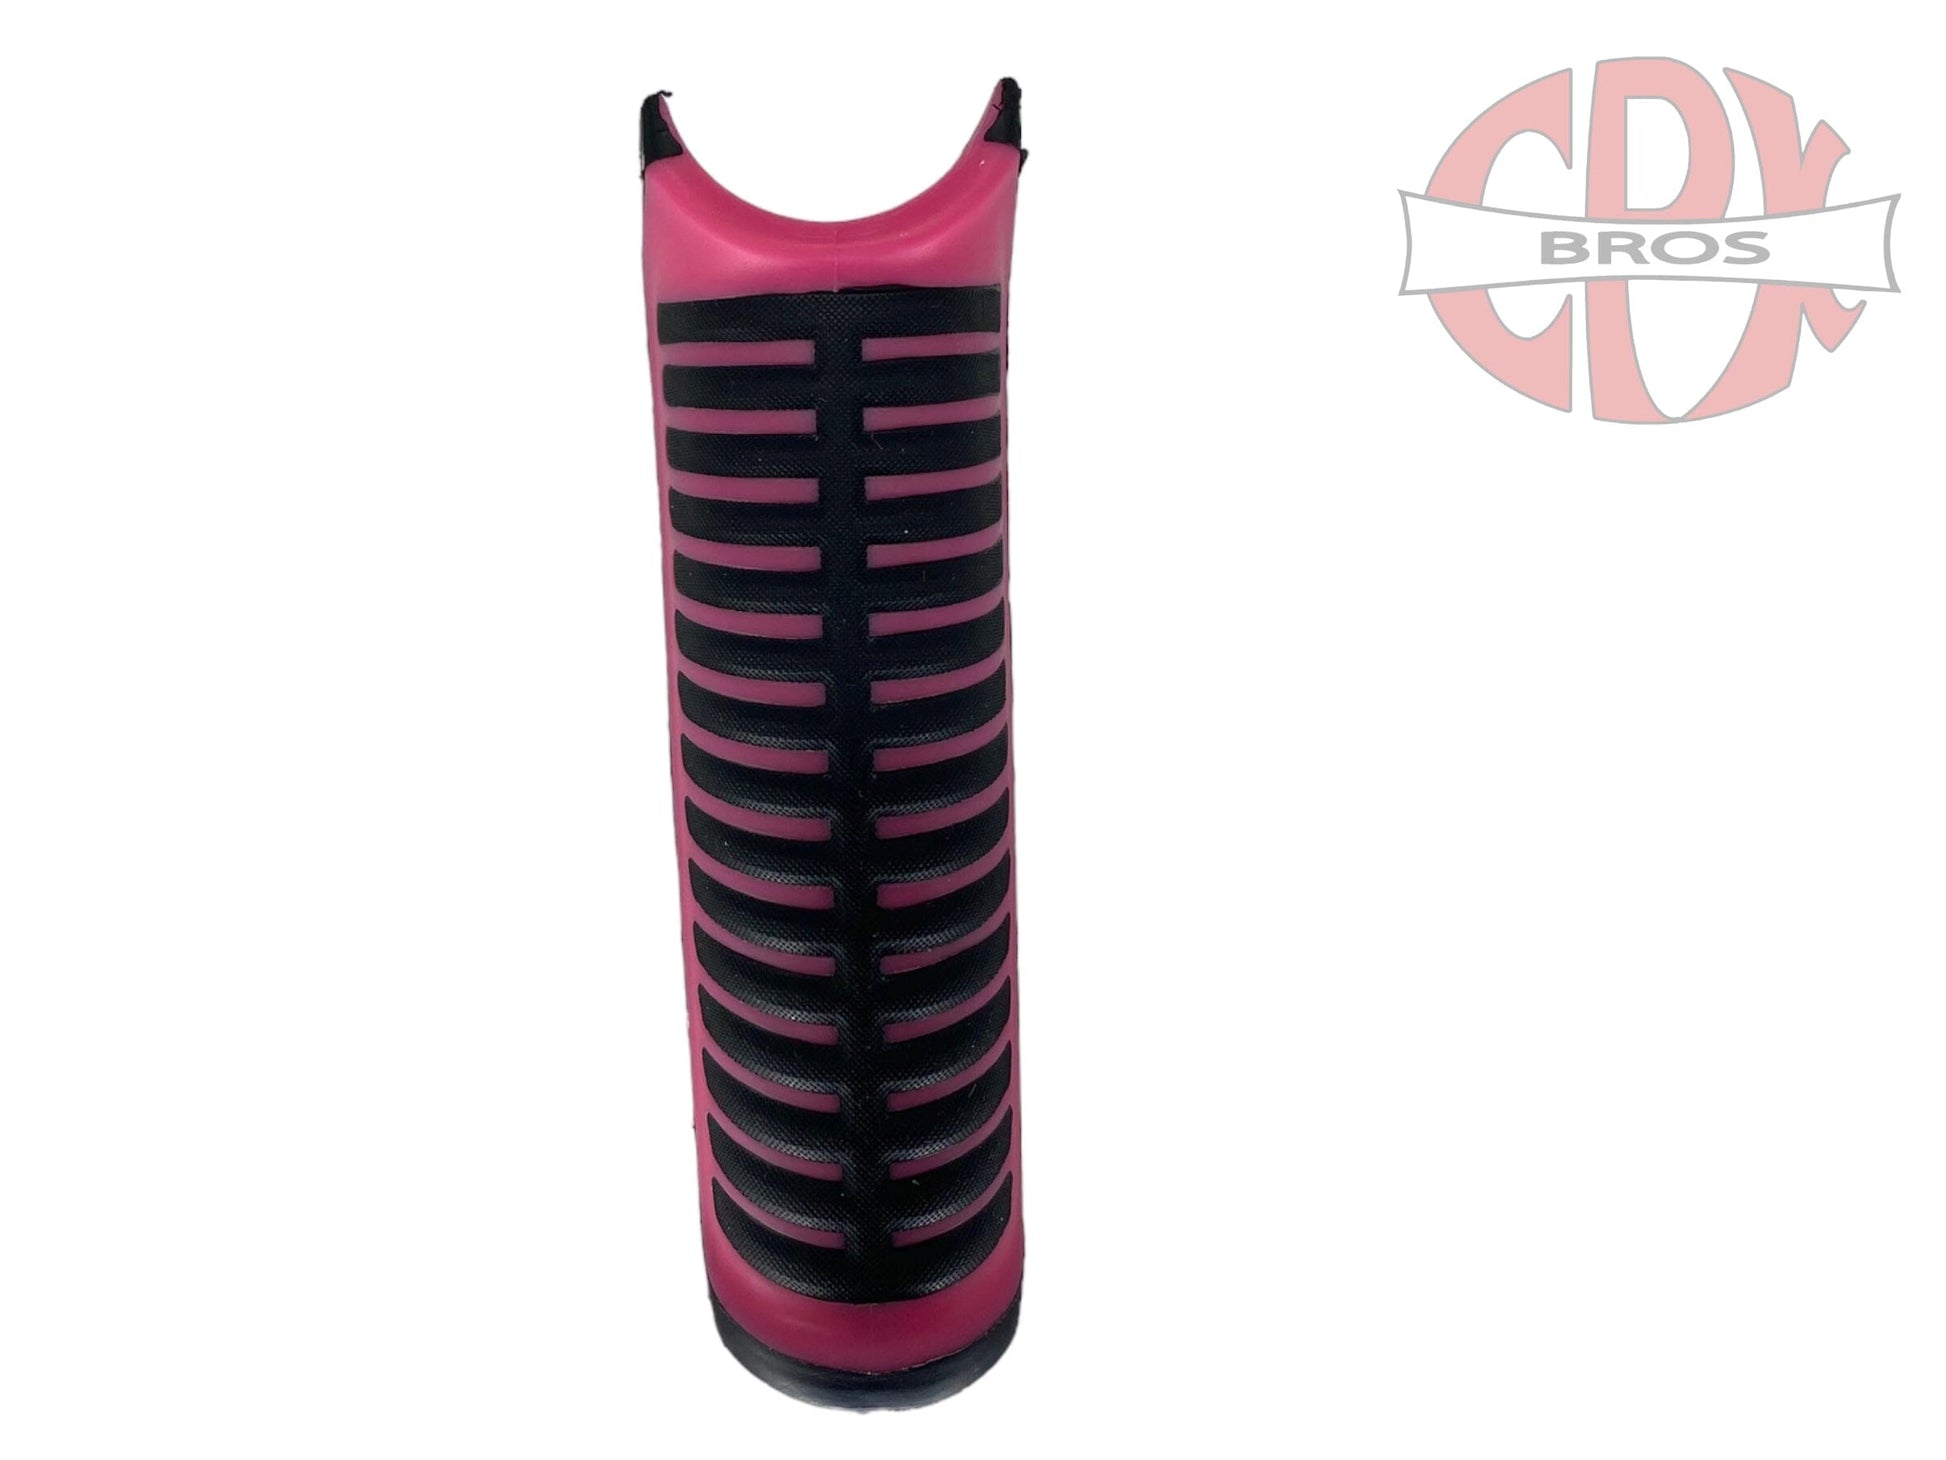 Used DLX Luxe Ice/Luxe X Front Rubber Grip - Pink Paintball Gun from CPXBrosPaintball Buy/Sell/Trade Paintball Markers, Paintball Hoppers, Paintball Masks, and Hormesis Headbands